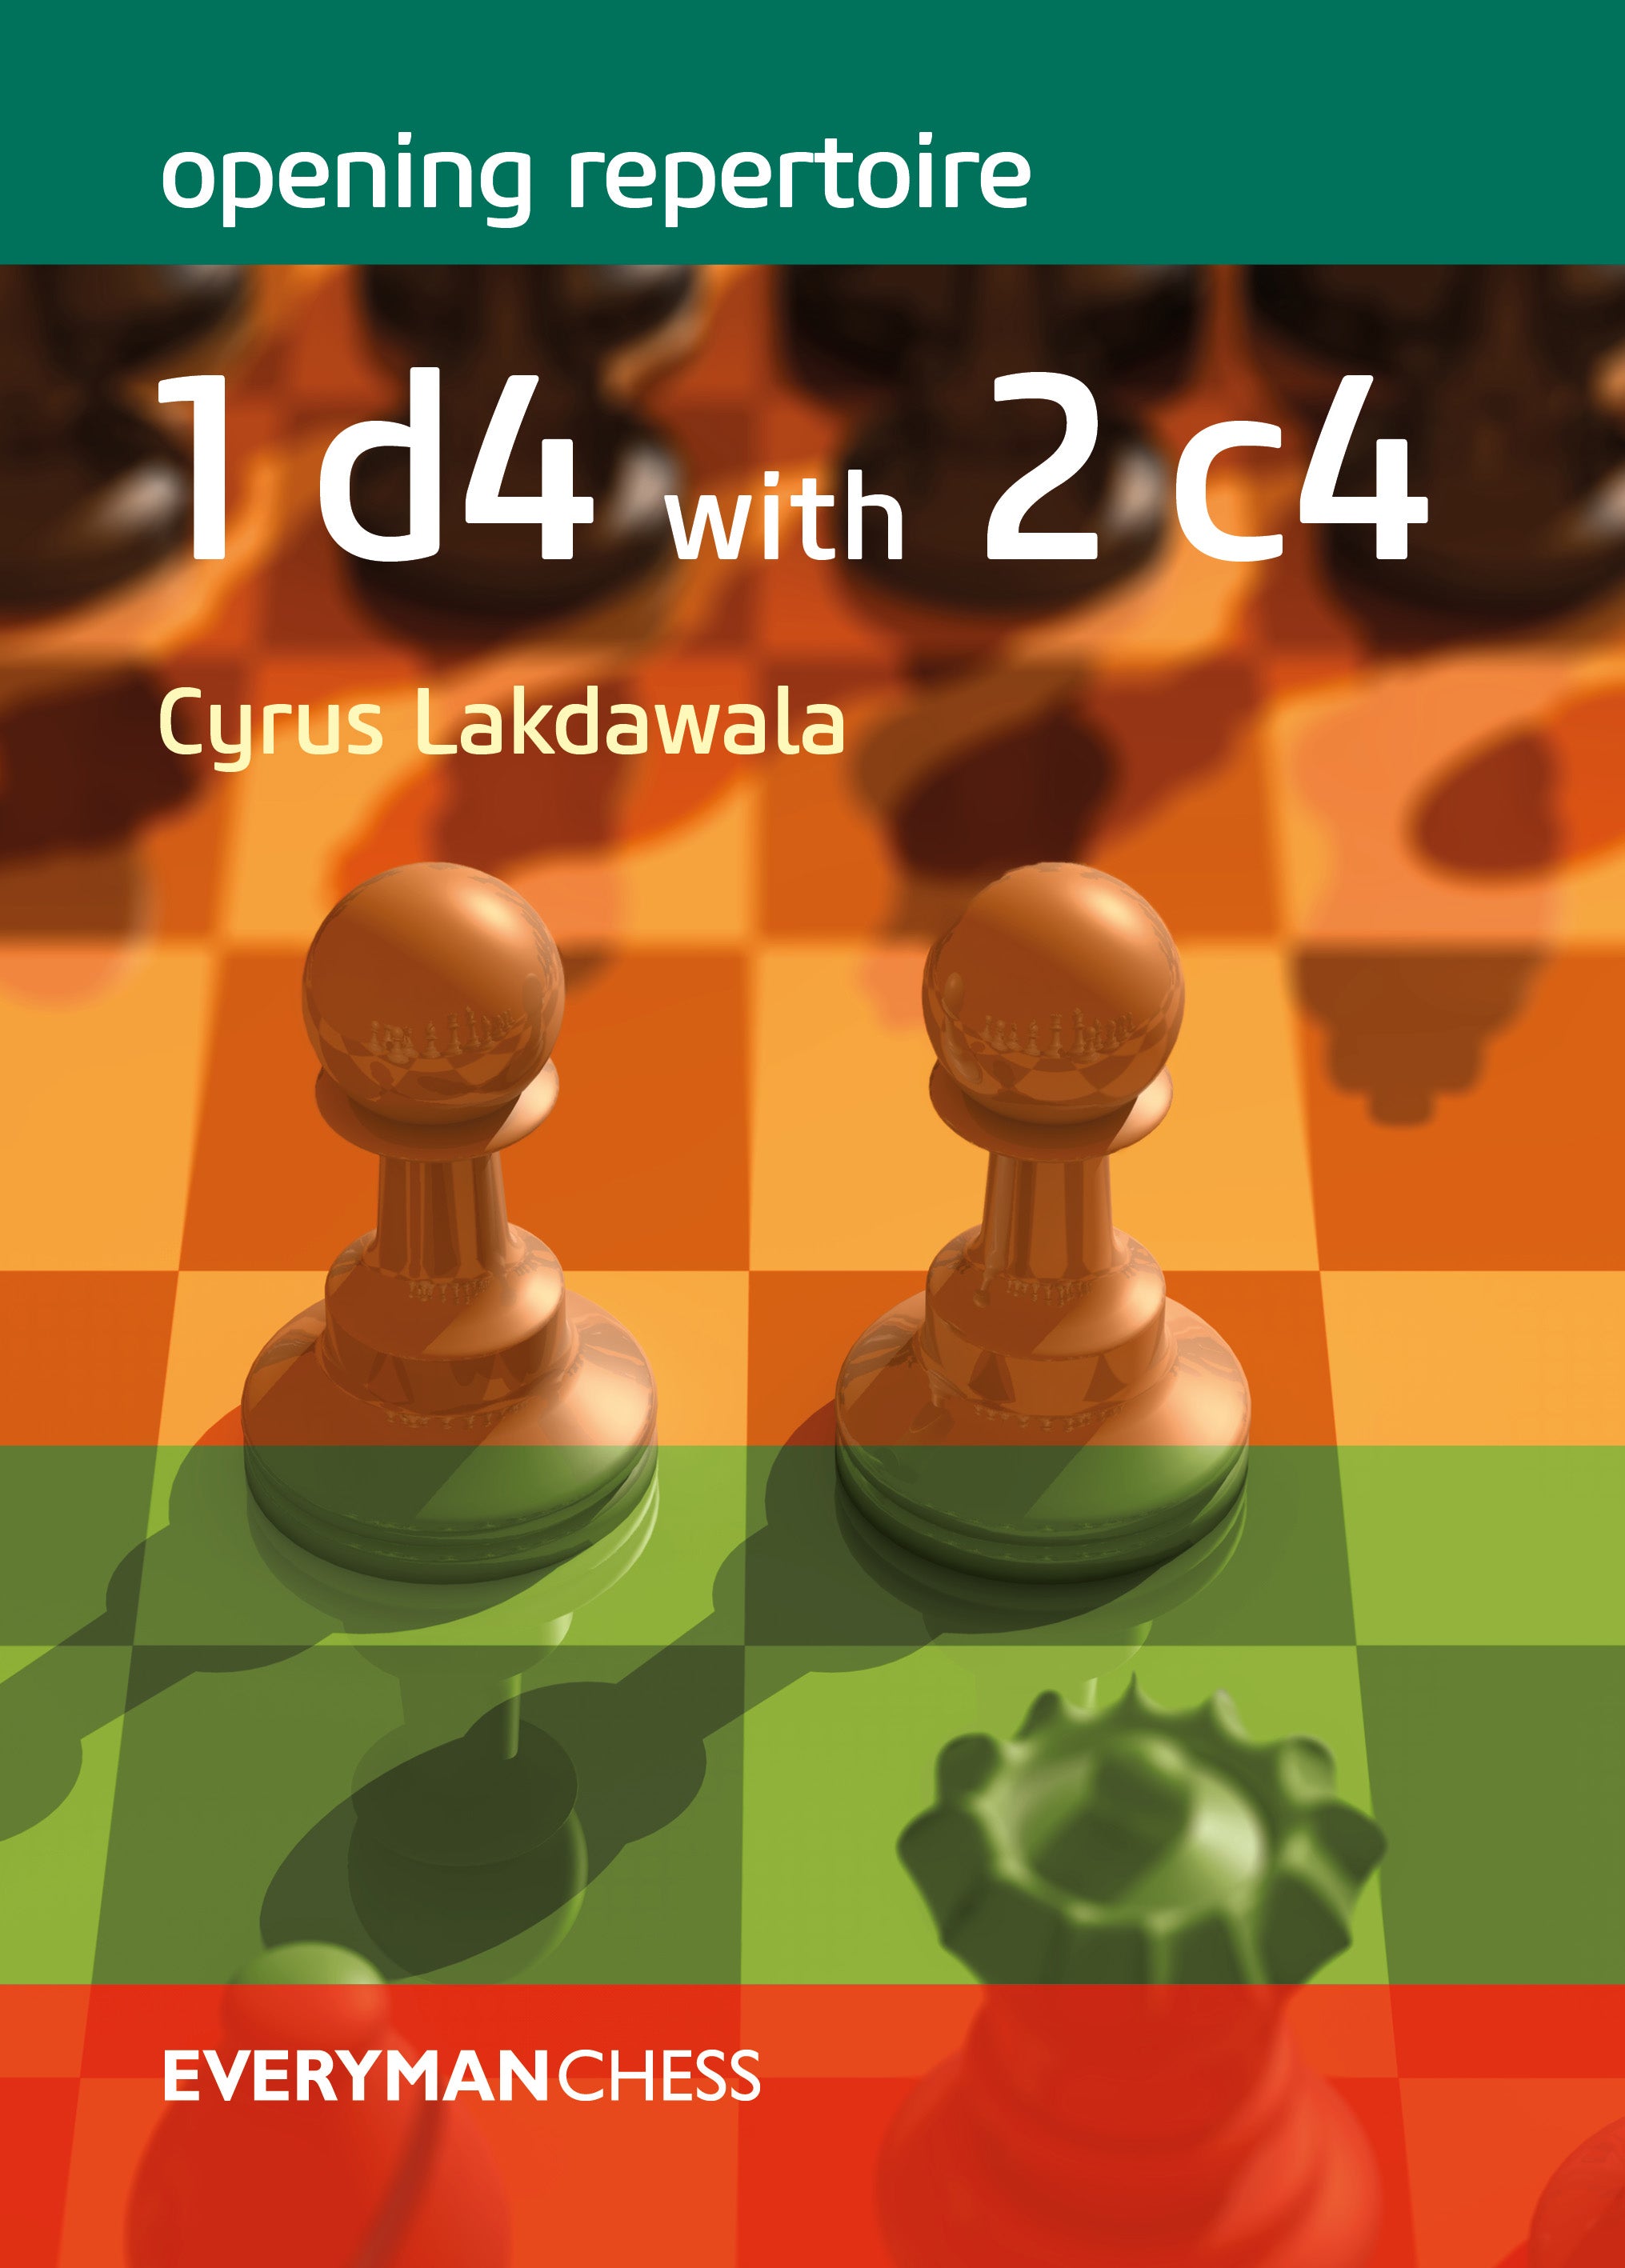 Opening Repertoire: Strategic Play with 1d4